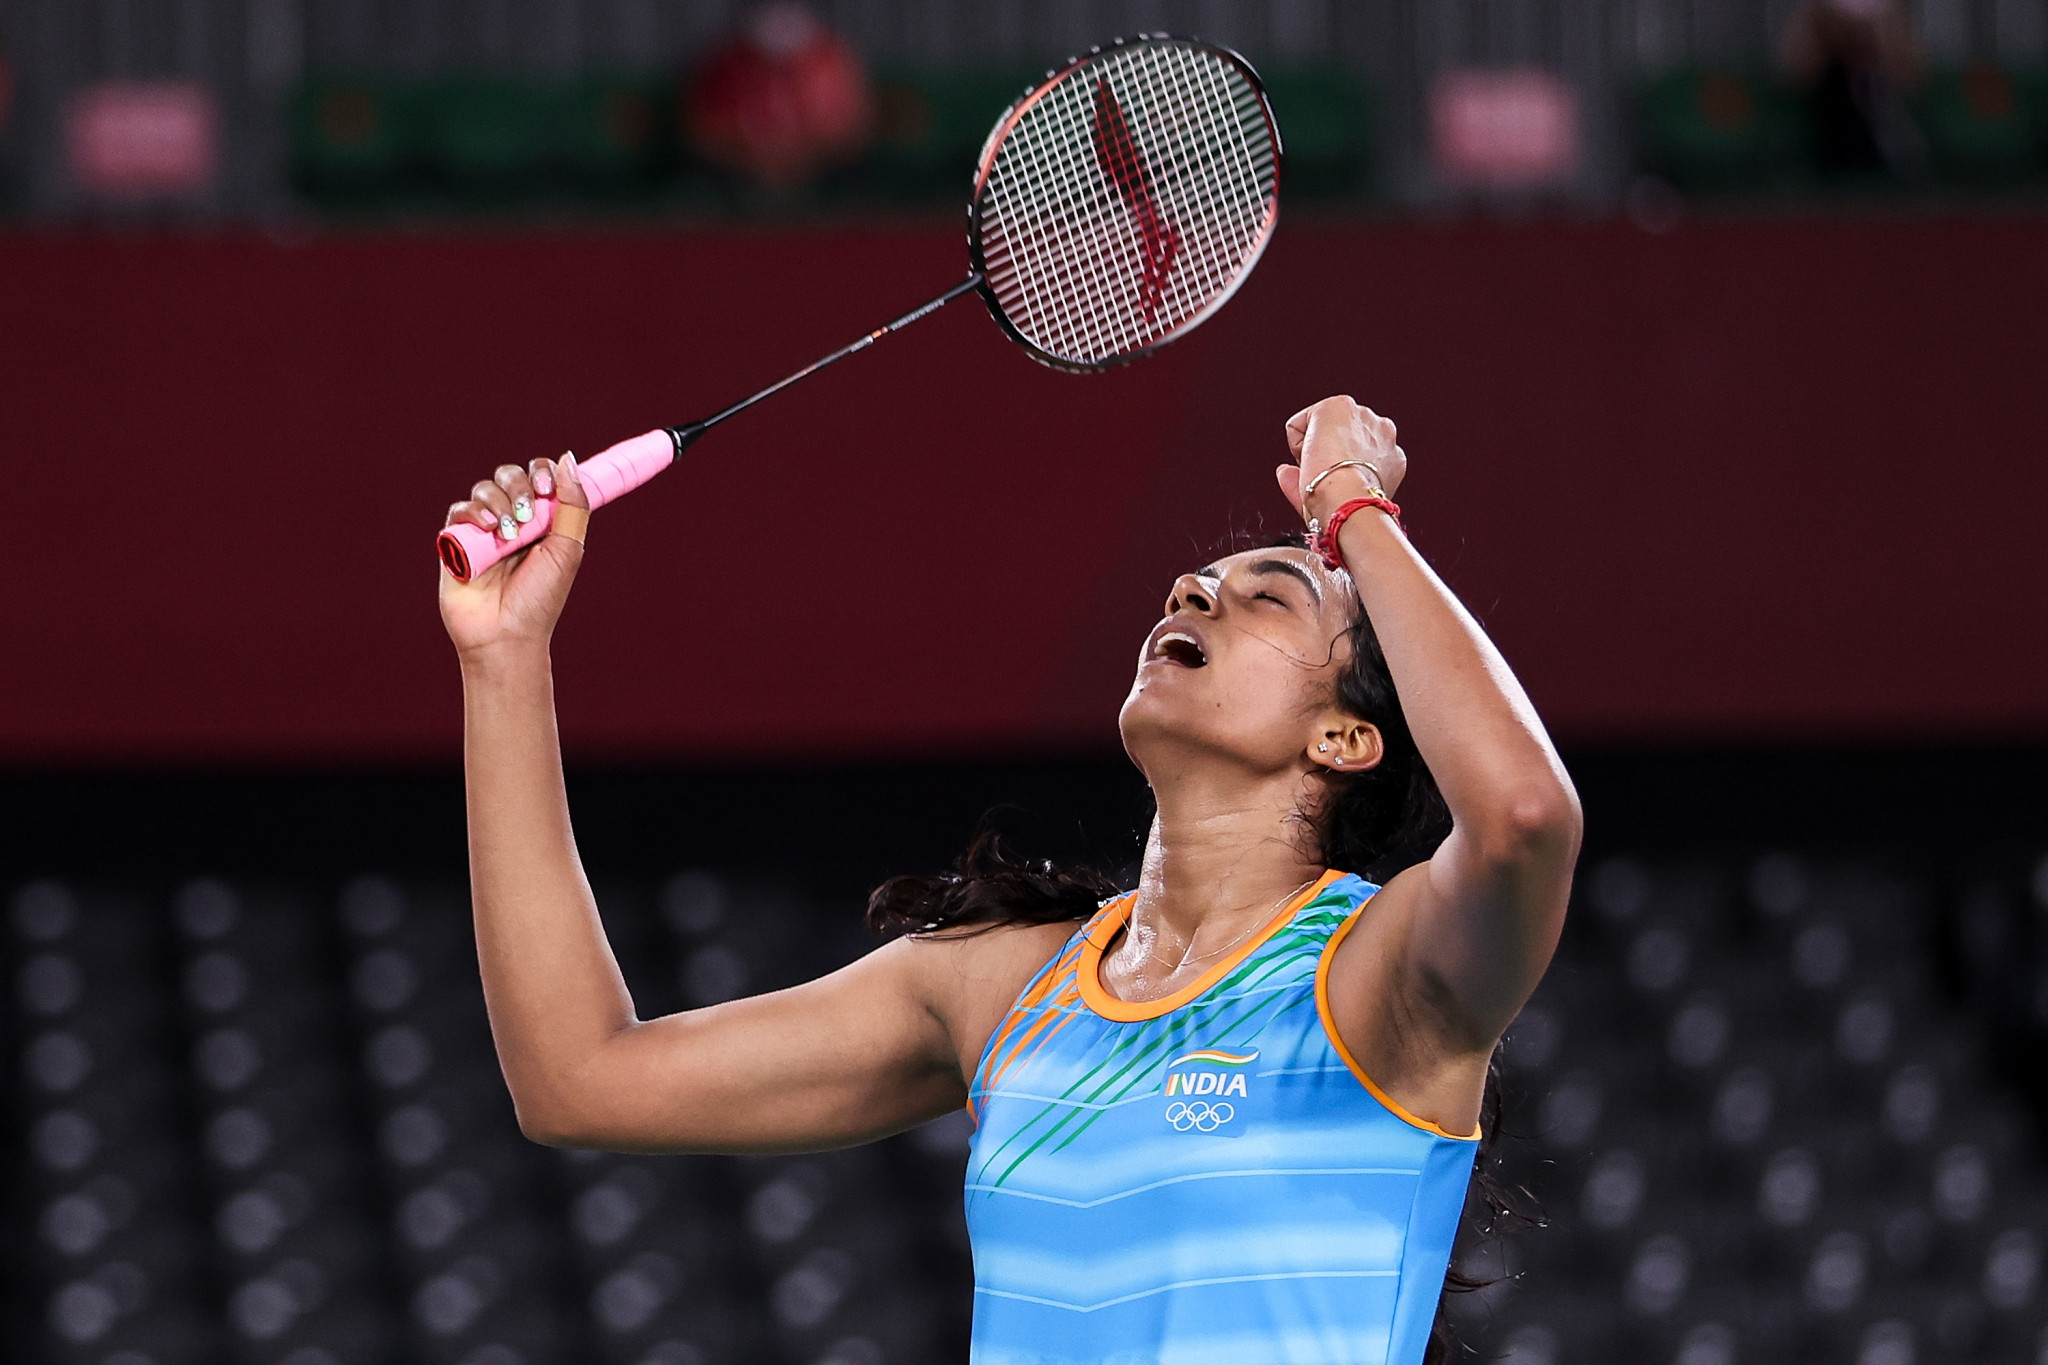 Olympic medallist Sindhu marches on at Badminton Asia Championships